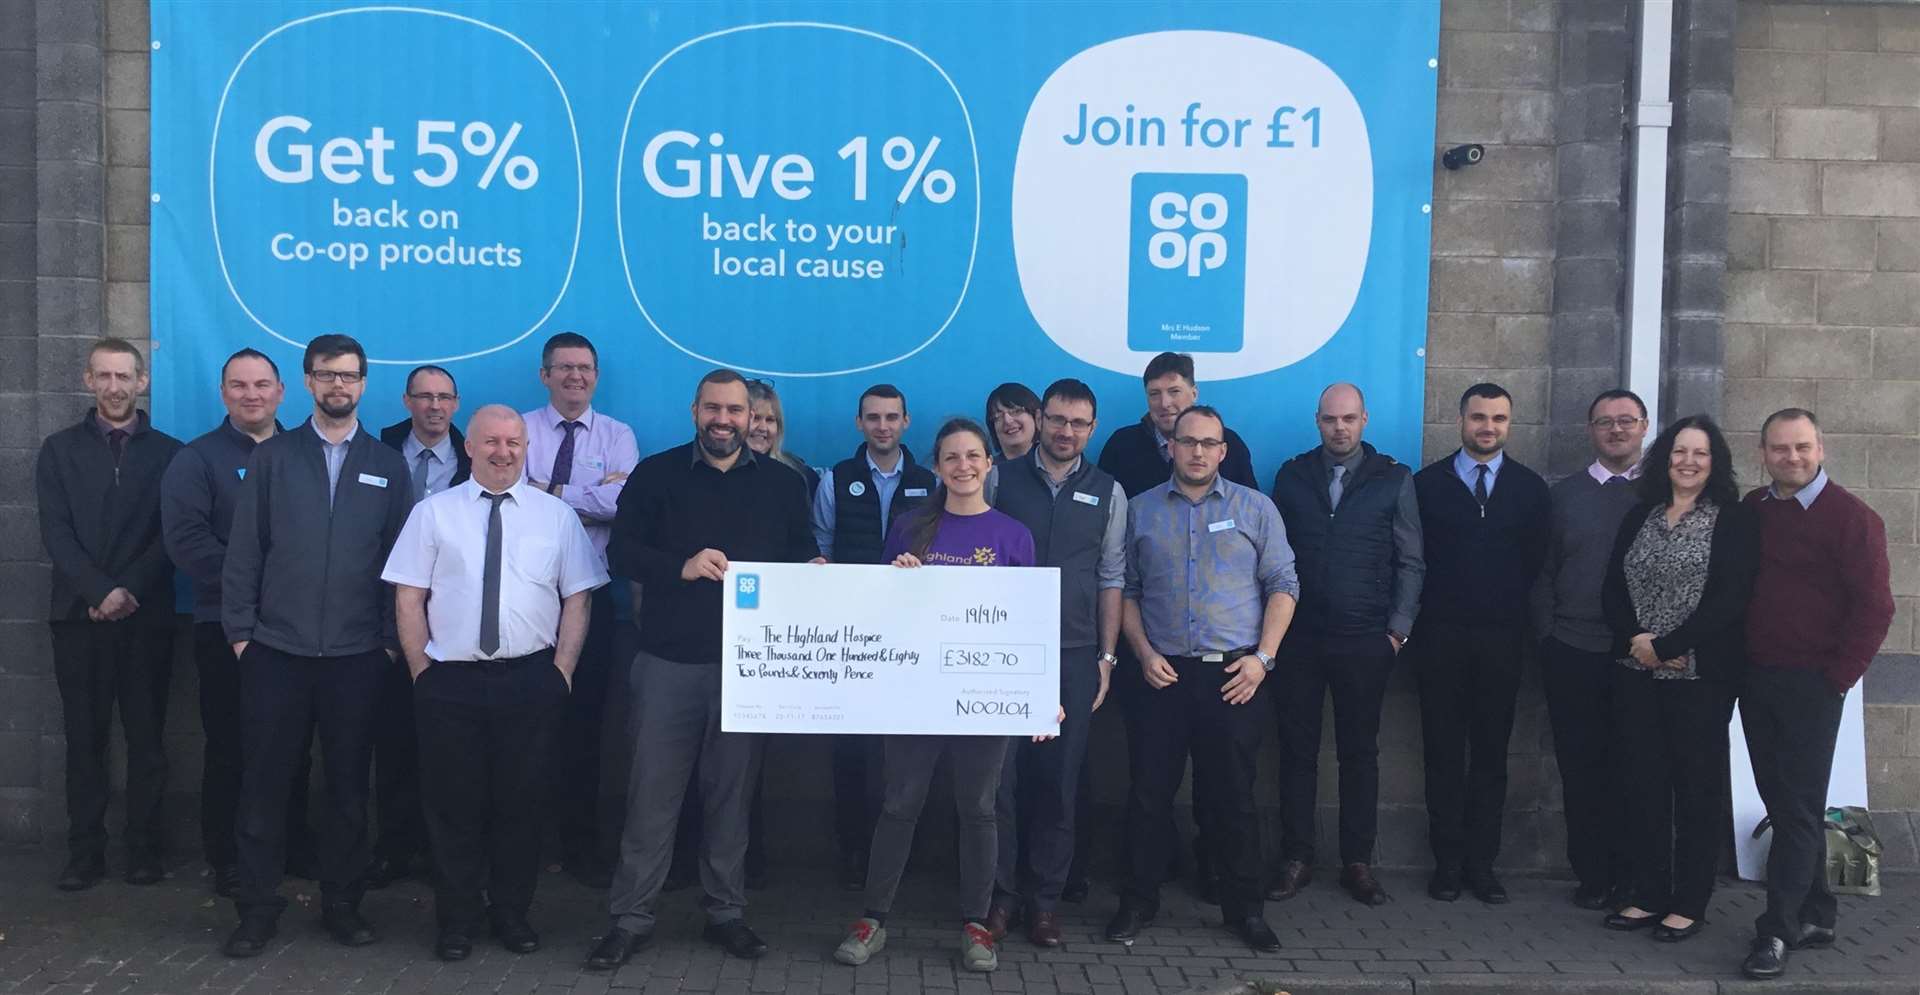 Staff from Co-op stores across the Highlands took part in a range of activities to fundraise for Highland Hospice.